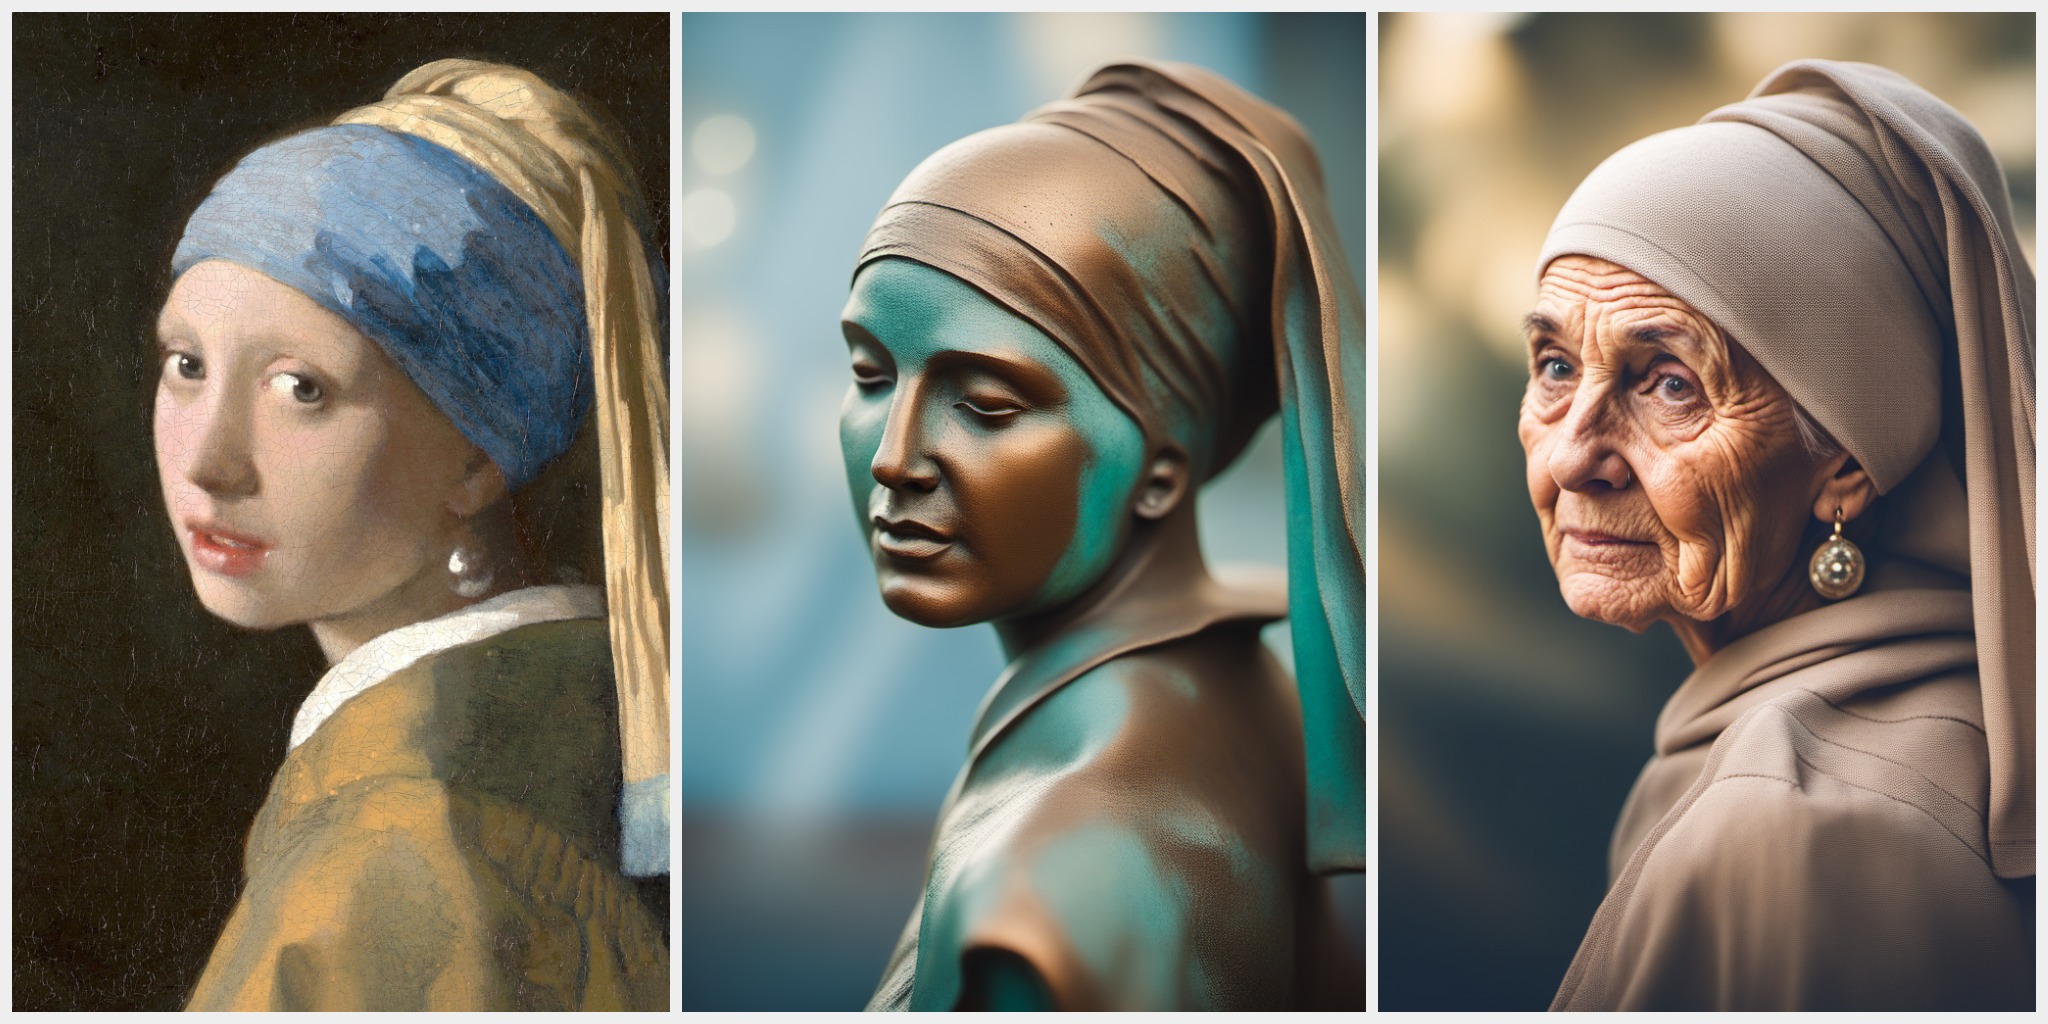 The Girl with the Pearl Earring, the original an depicted as a bronze statue and a photorealistic old woman